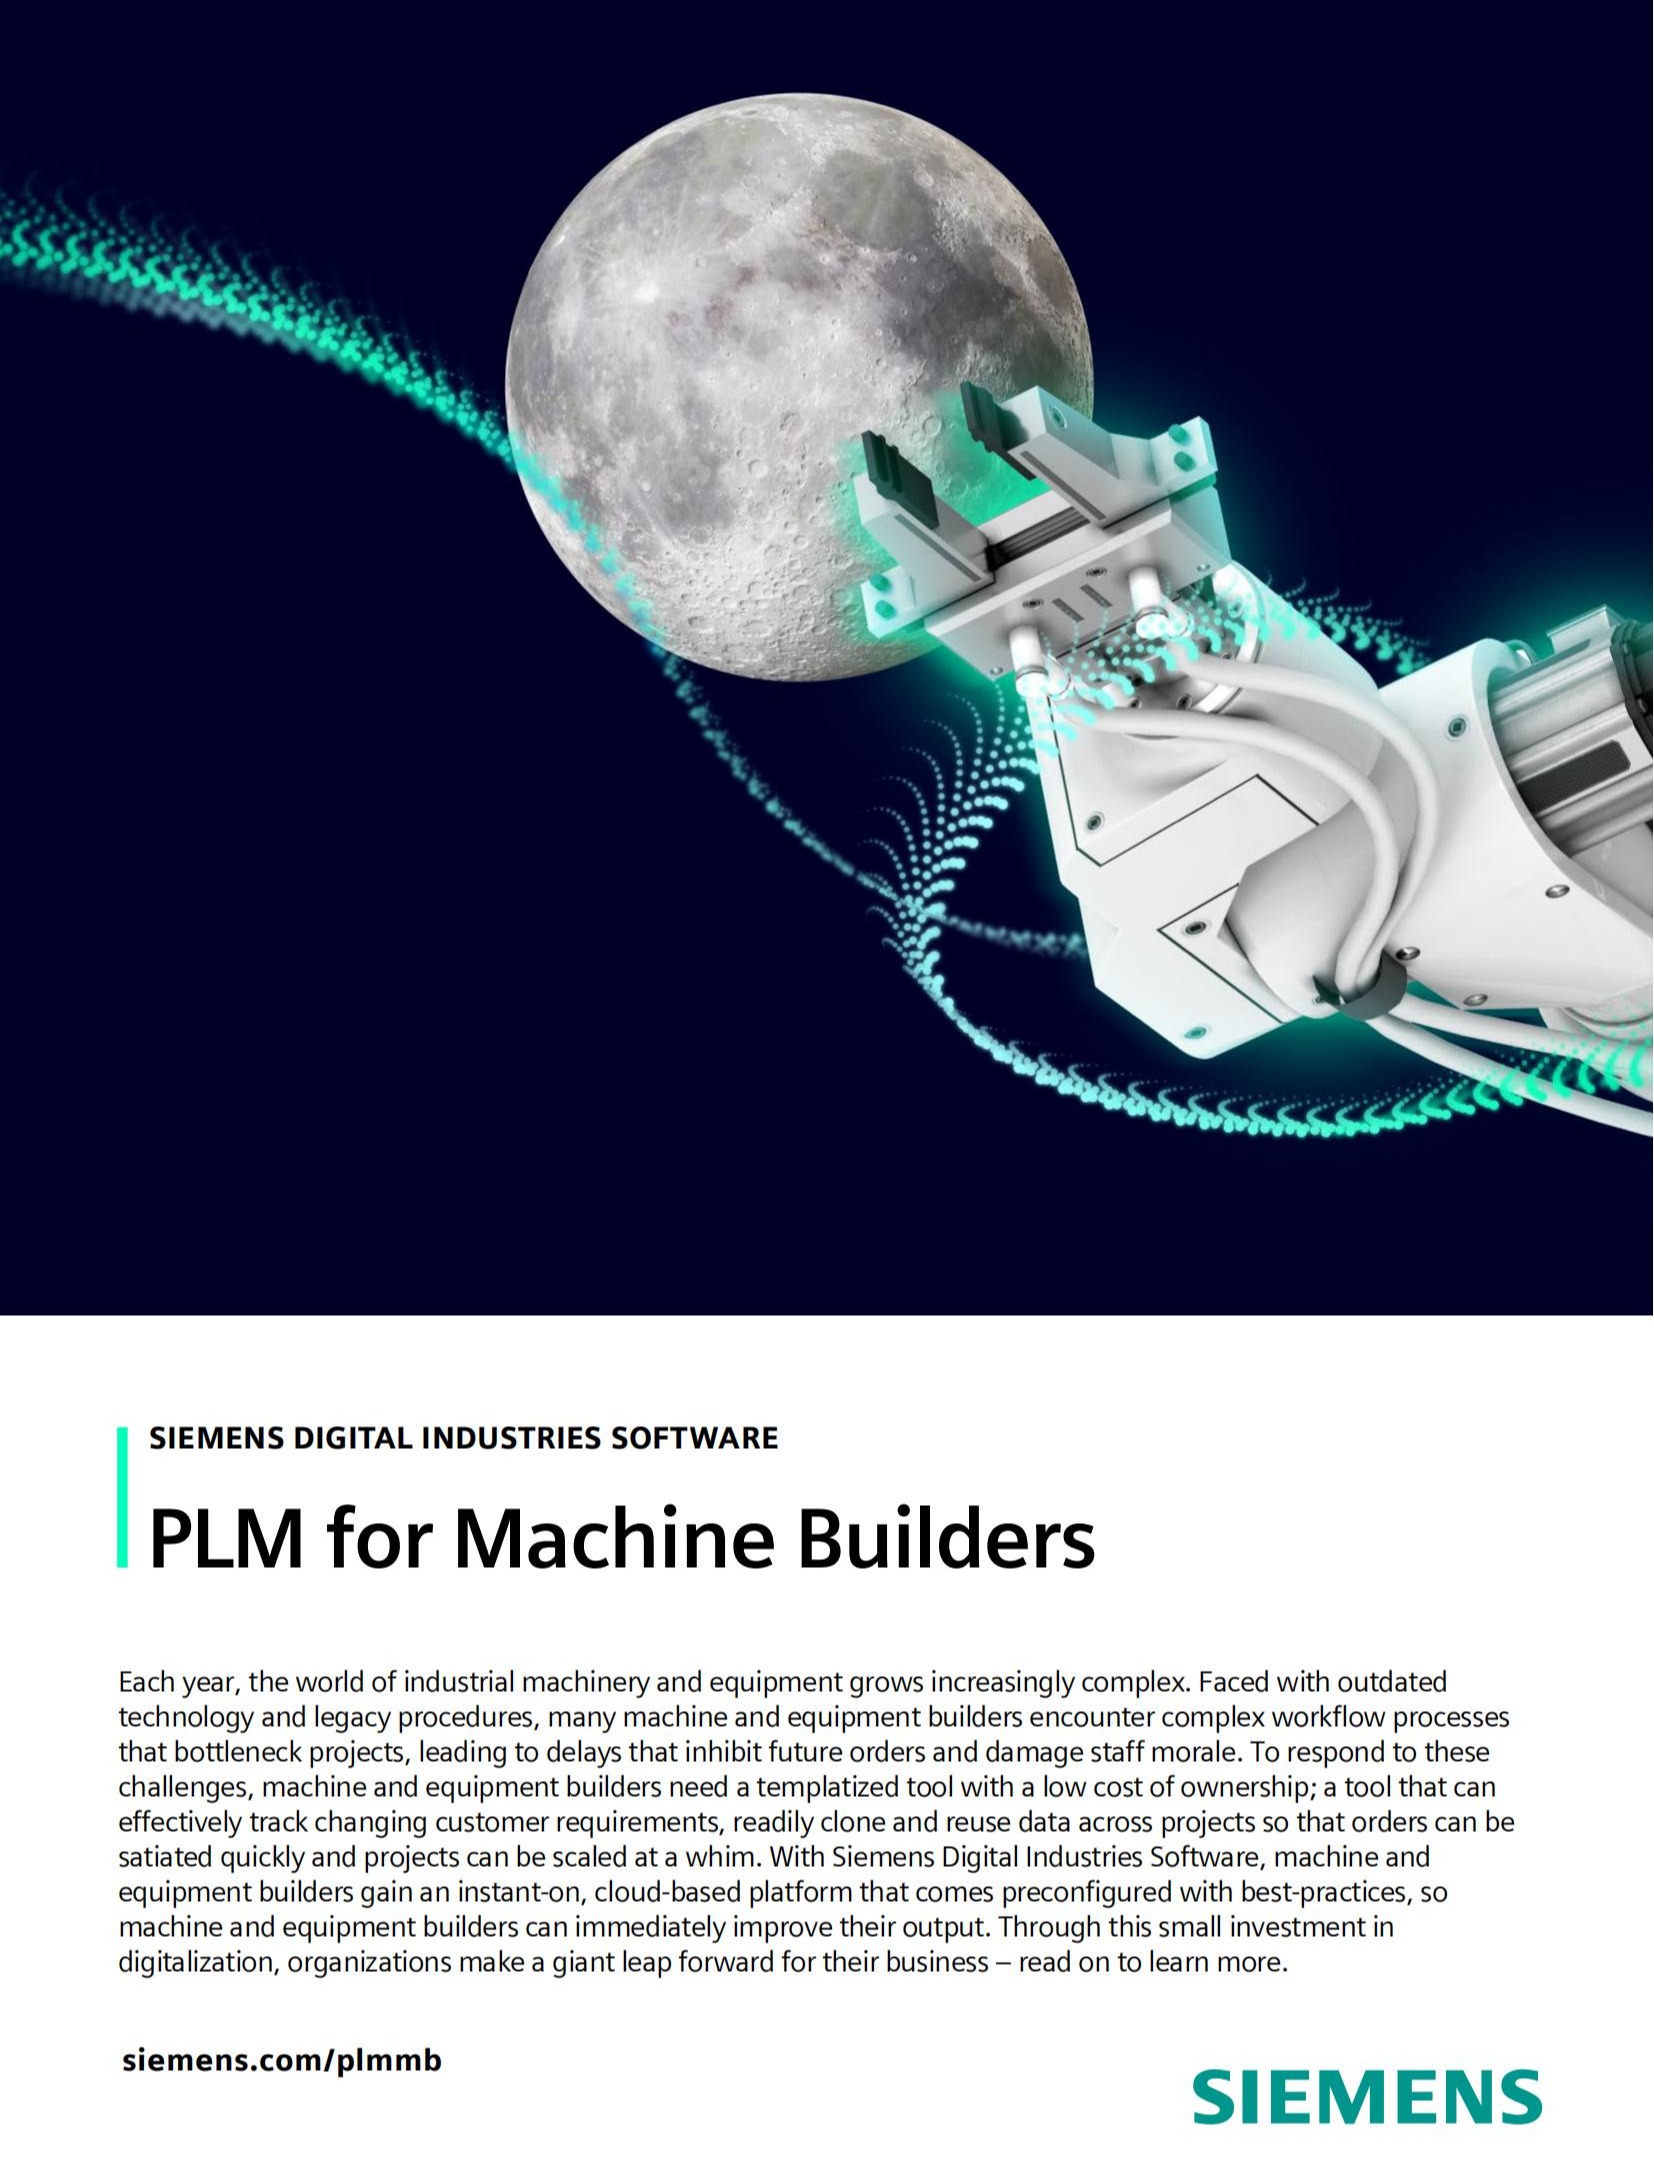 Executive Brief on PLM for Machine Builders